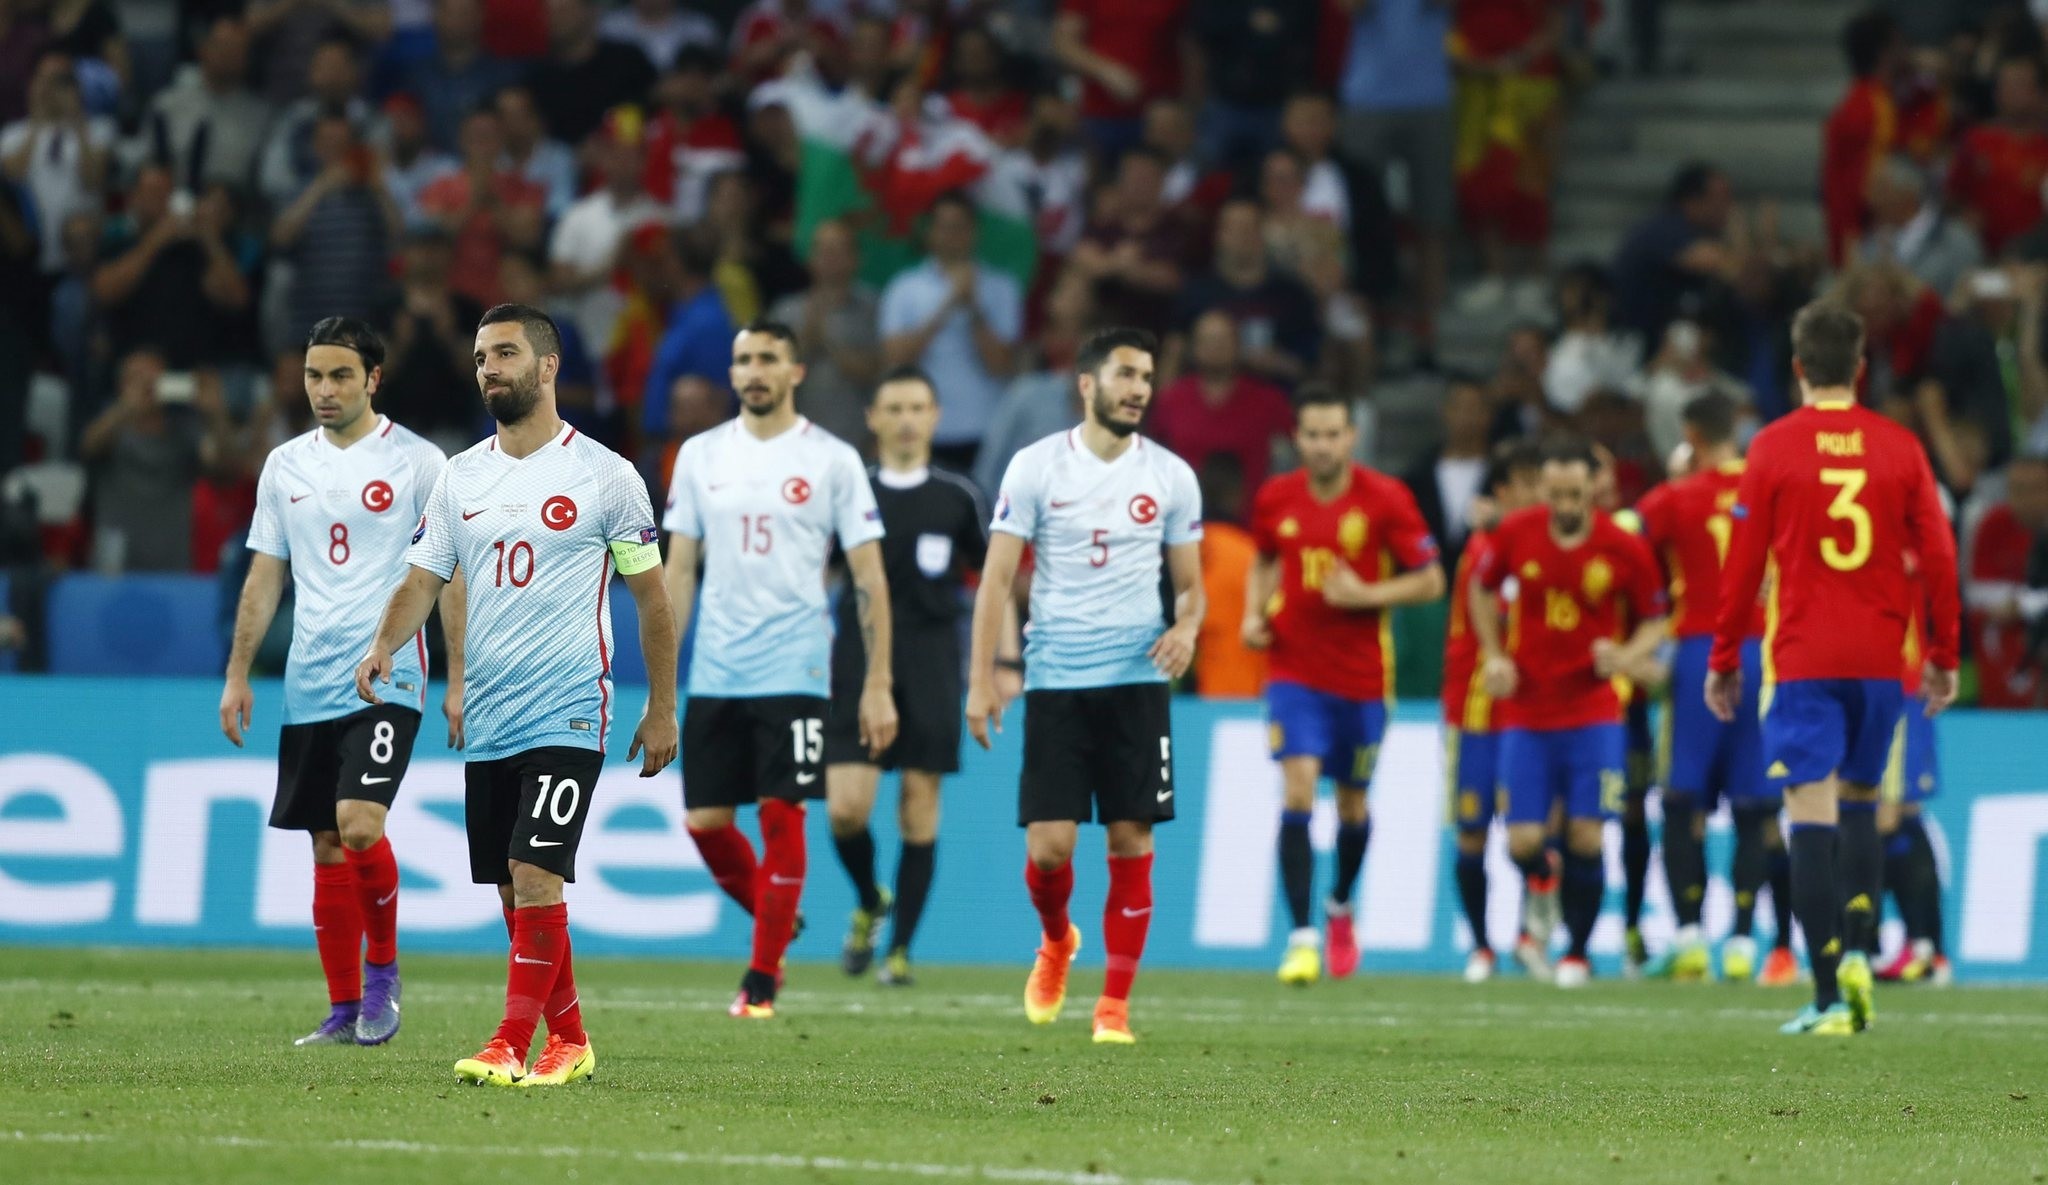 Turkey's Arda Turan reacts after Spain's Alvaro Morata (not pictured) scores their third goal  (REUTERS Photo)